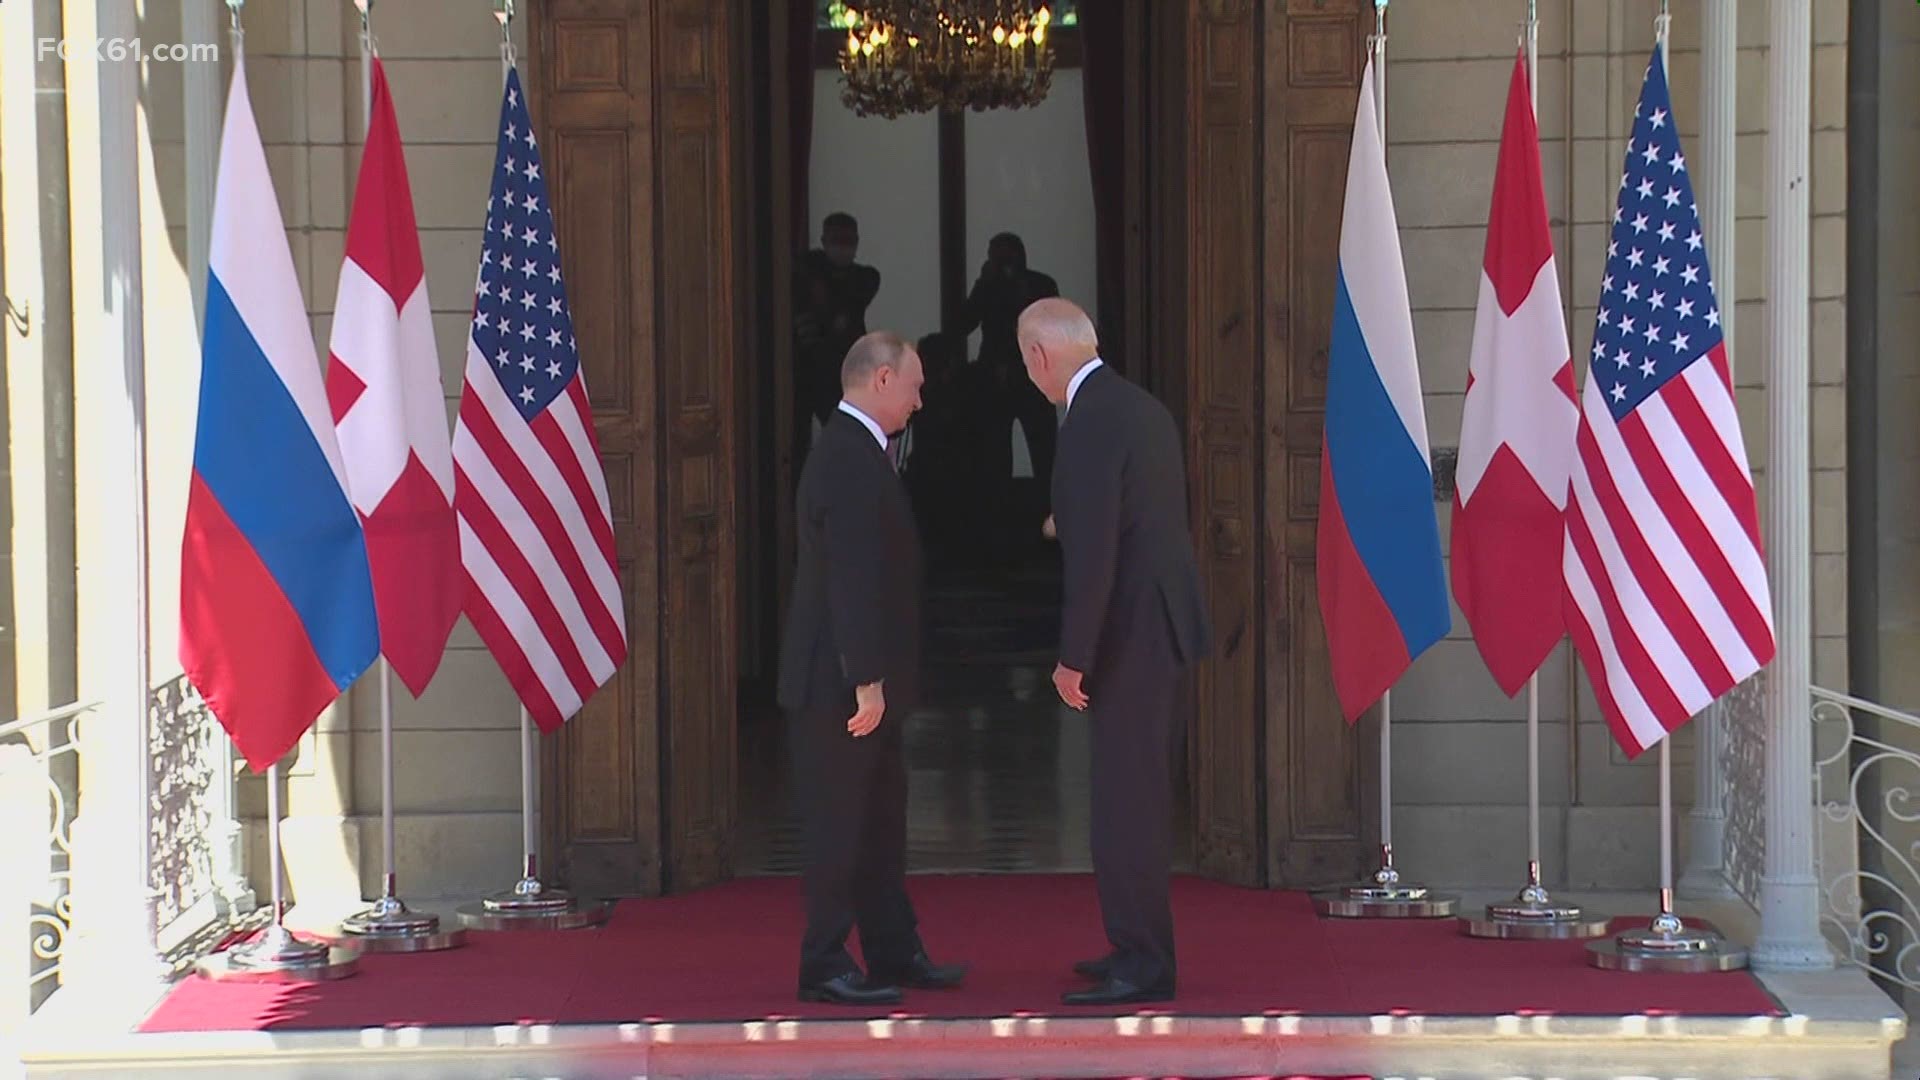 President Biden said the face-to-face talks are a discussion between “two great powers” and Putin, for his part, said he hoped the summit would be “productive."